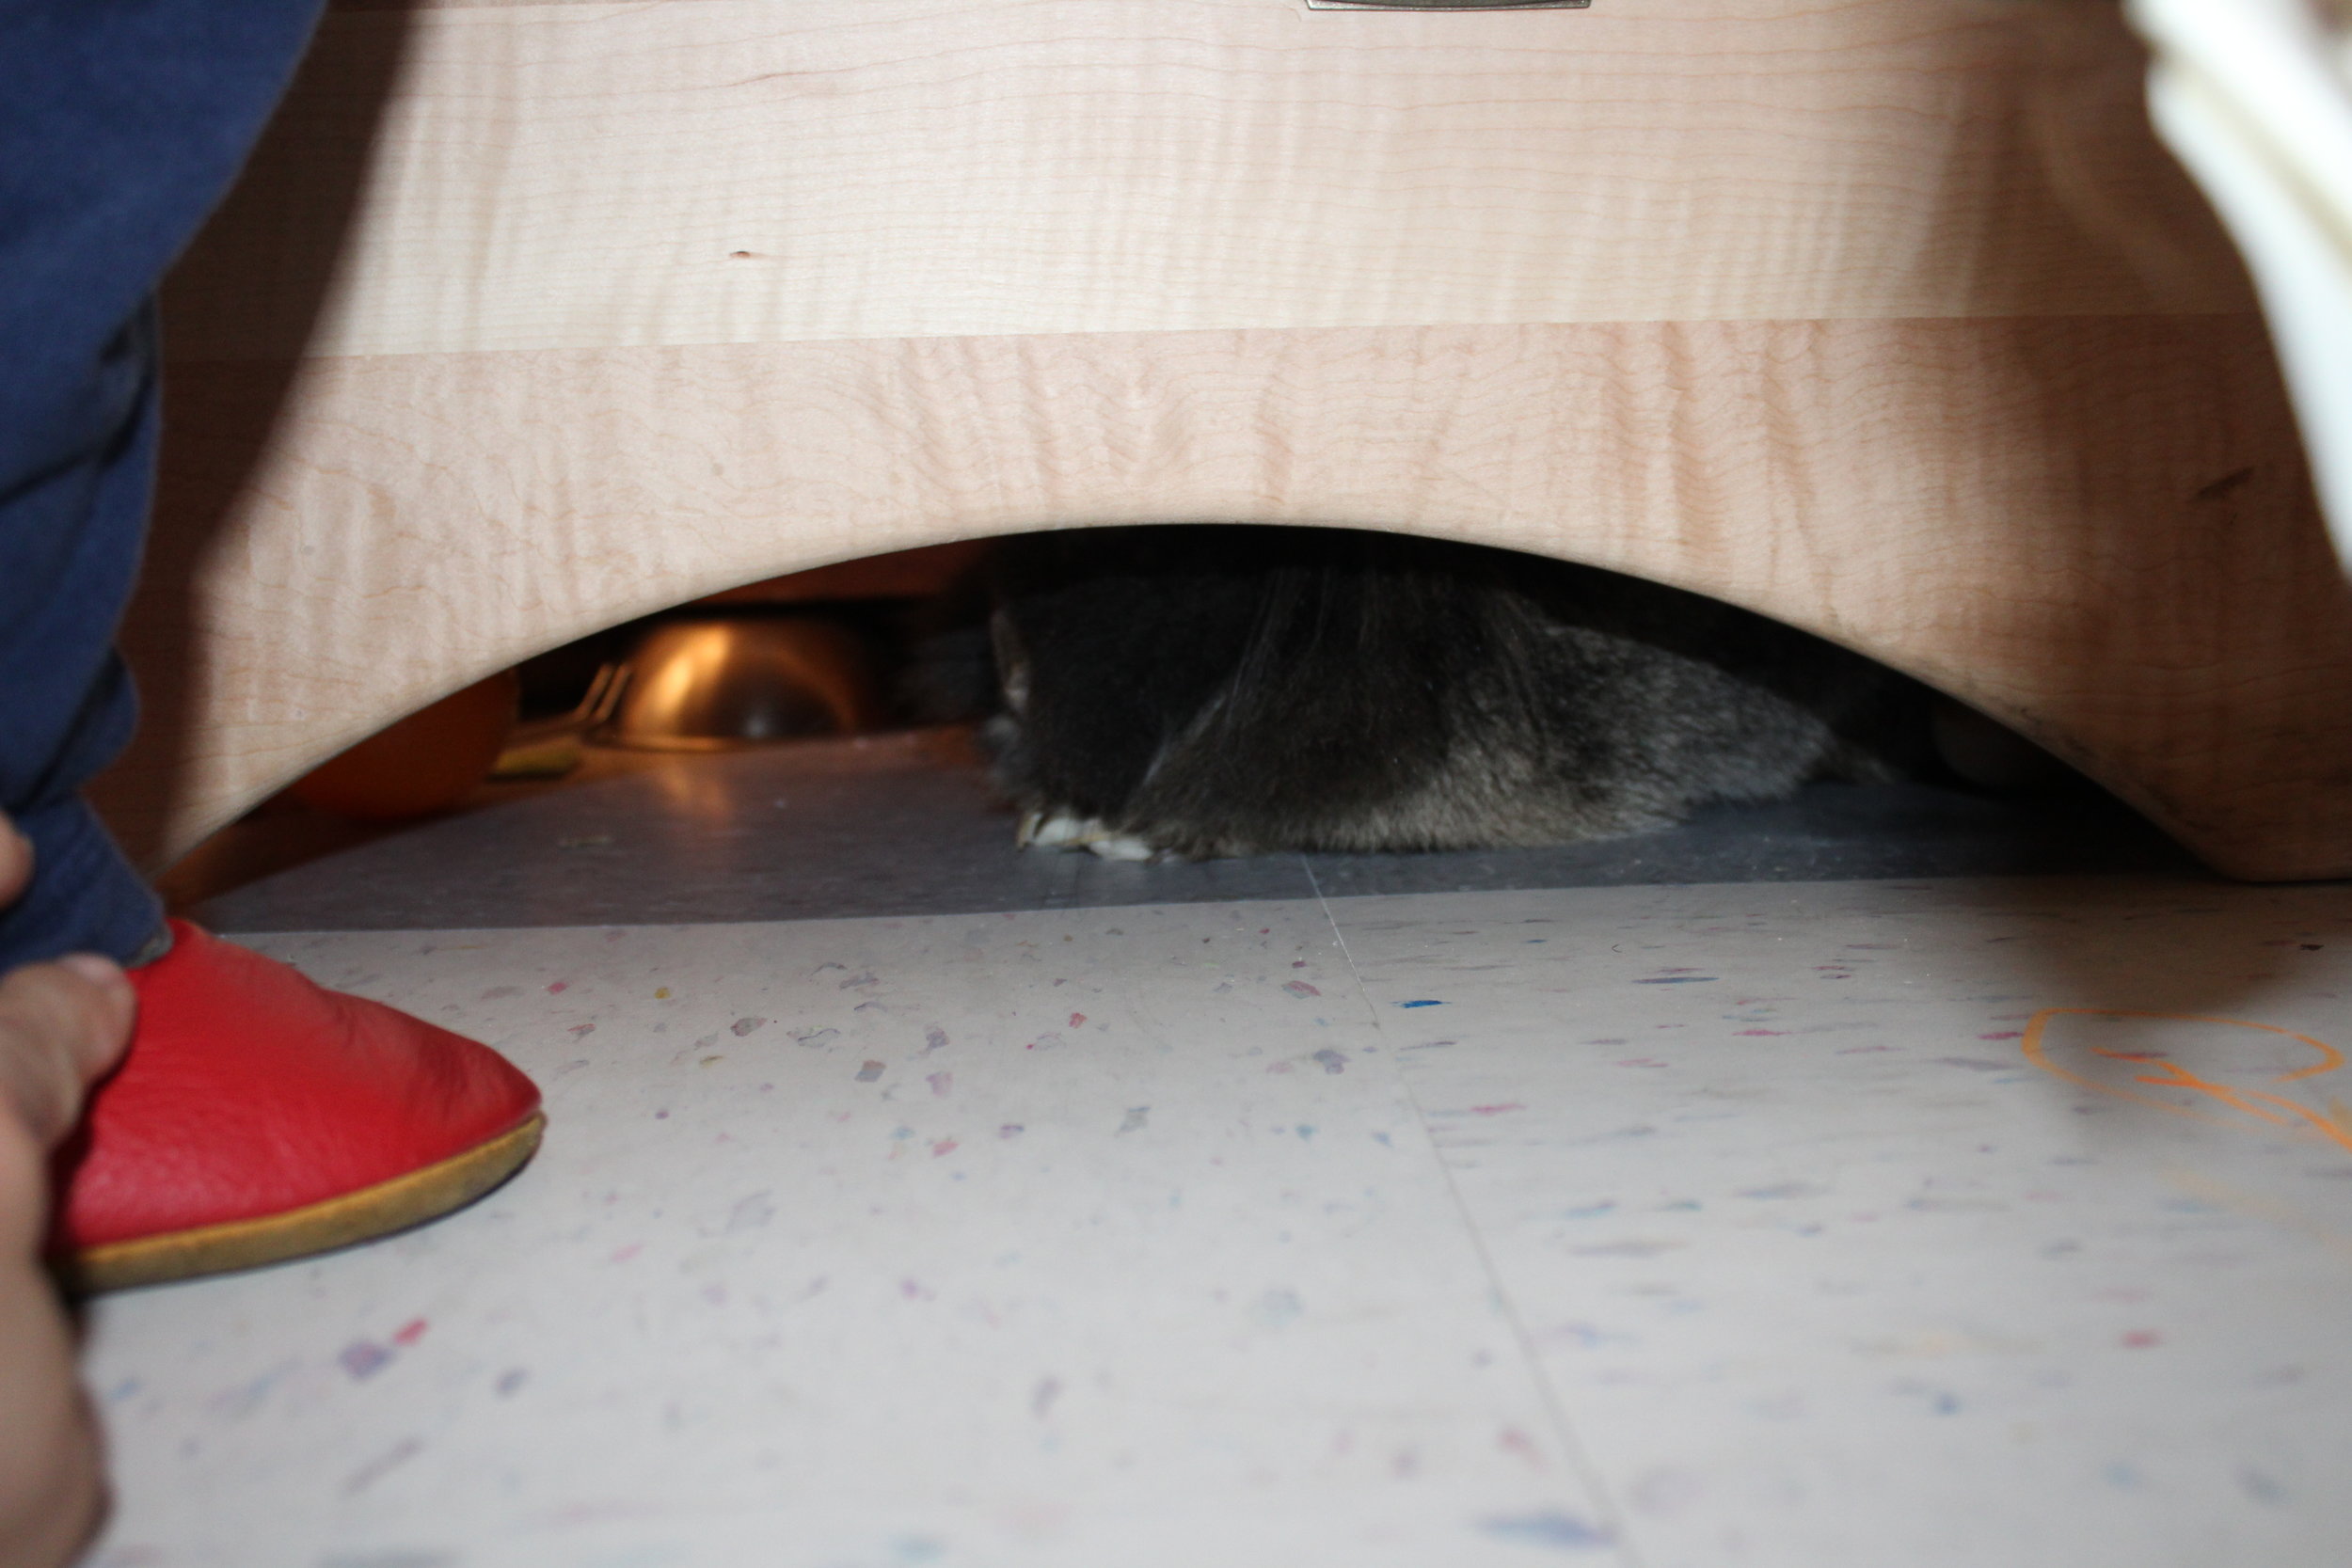  As Ellis (red shoe) explores the kitchen center, Pinky remains quiet under the stove!&nbsp; 